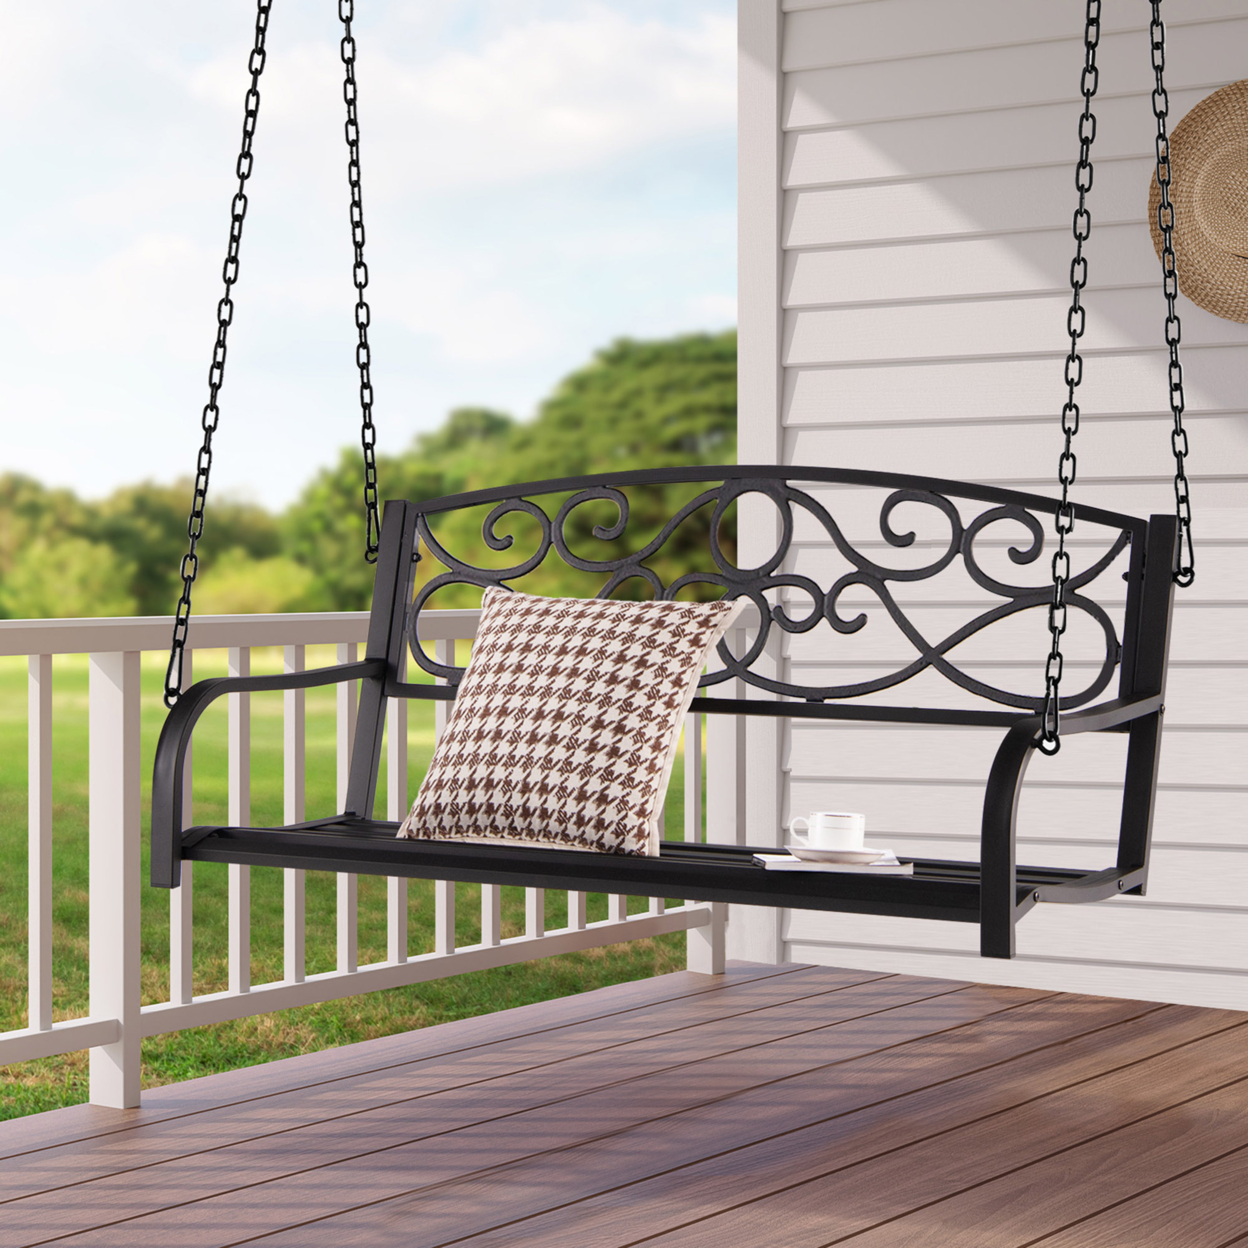 Patio Hanging Porch Swing Outdoor 2-Person Metal Swing Bench Chair W/ Chains - Brown